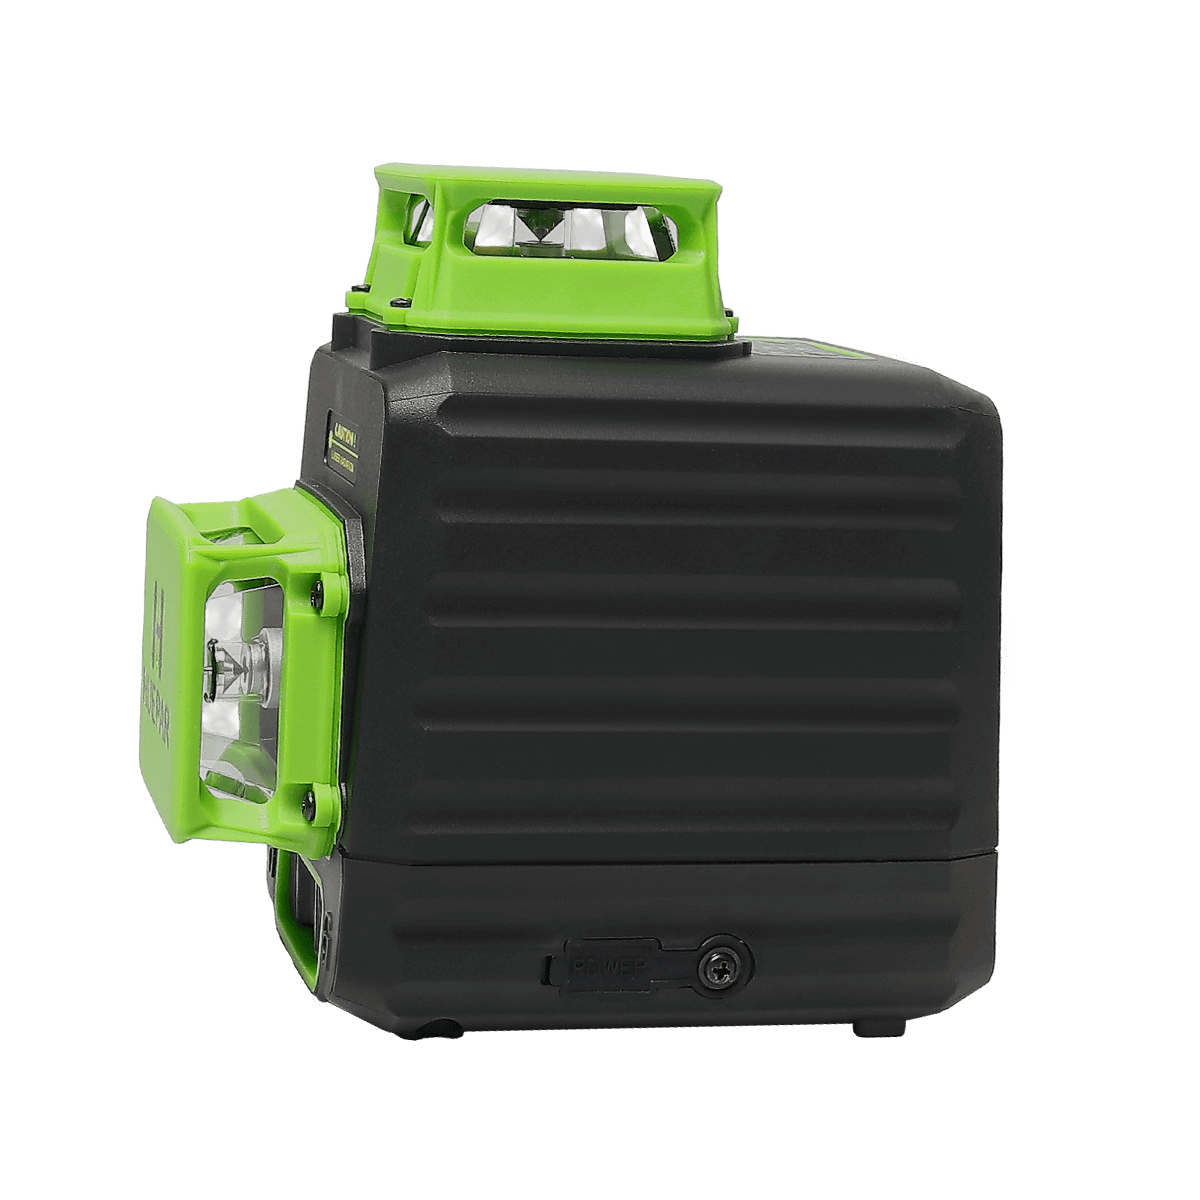 POPOMAN Laser Level Green 2x360°, Line laser rechargeable with Lithium  battery, Self Leveling, Pulsed mode, Magnetic Auxiliary Supporting Bracket,  IP54, Carry bag Include - MTM340B (Color: MTM340B)